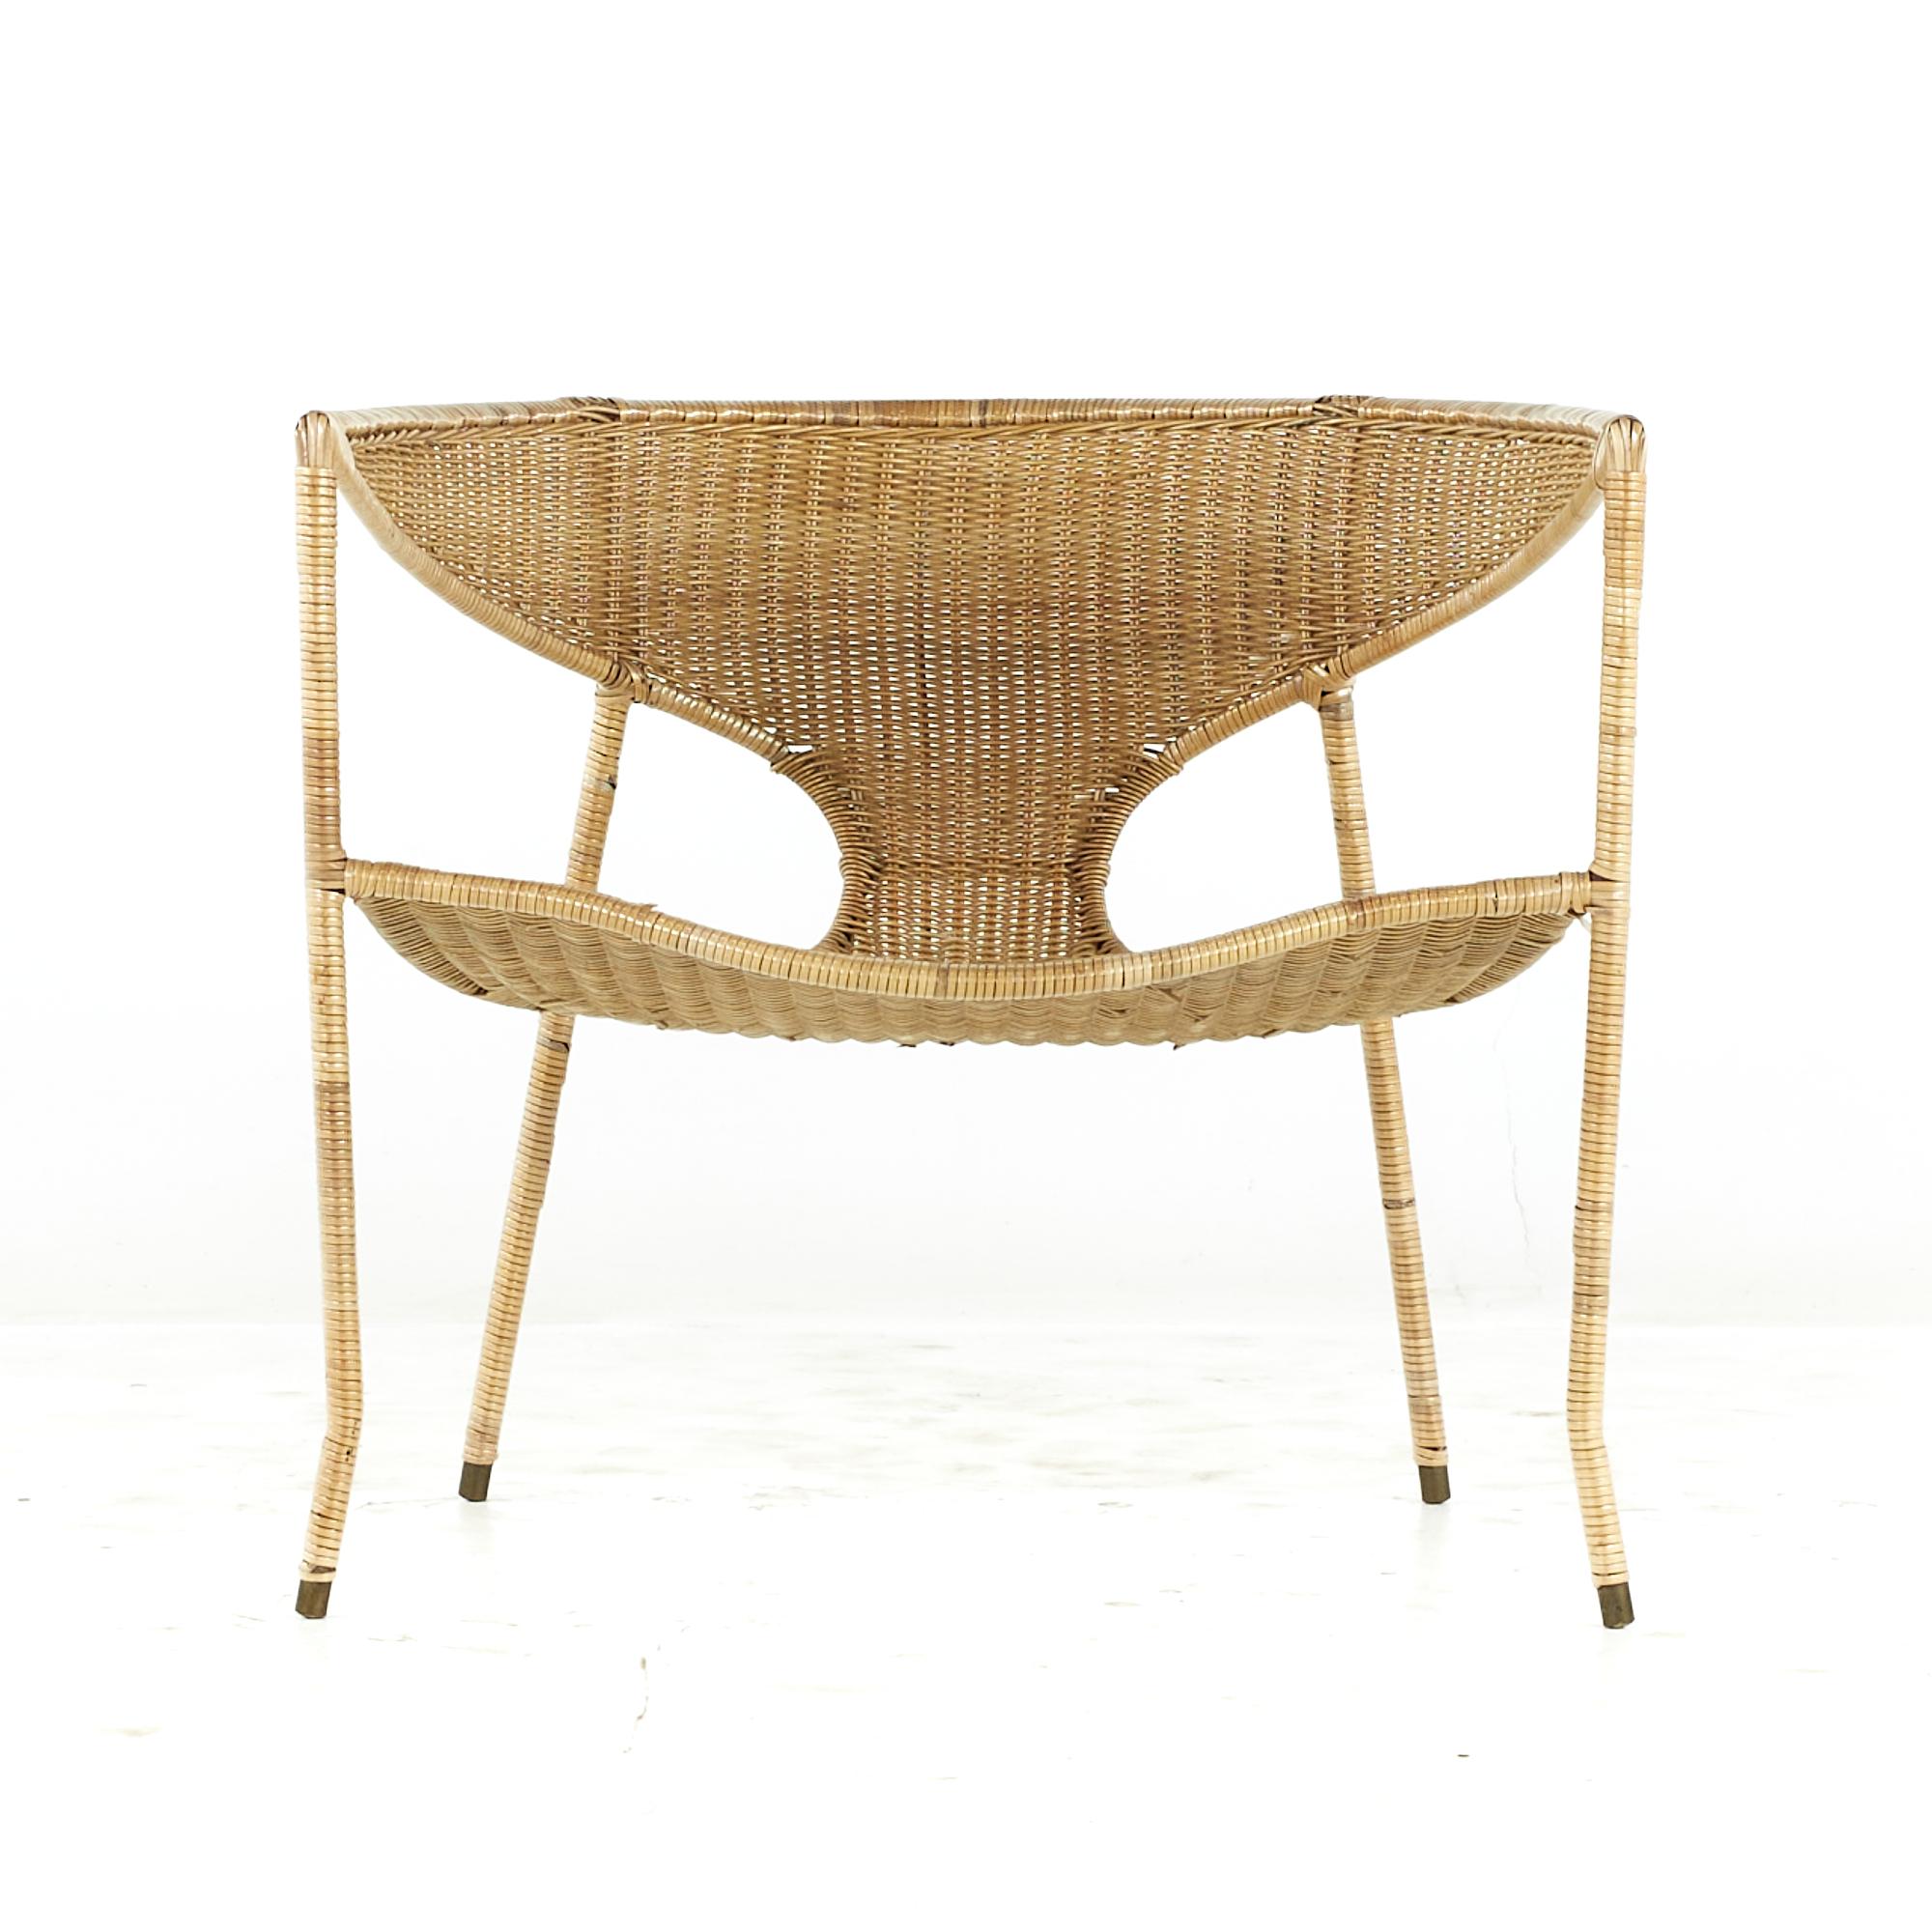 Francis Mair midcentury Wicker Chair

This chair measures: 30 wide x 25 deep x 27.25 high, with a seat height of 15 and arm height/chair clearance 27 inches 

All pieces of furniture can be had in what we call restored vintage condition. That